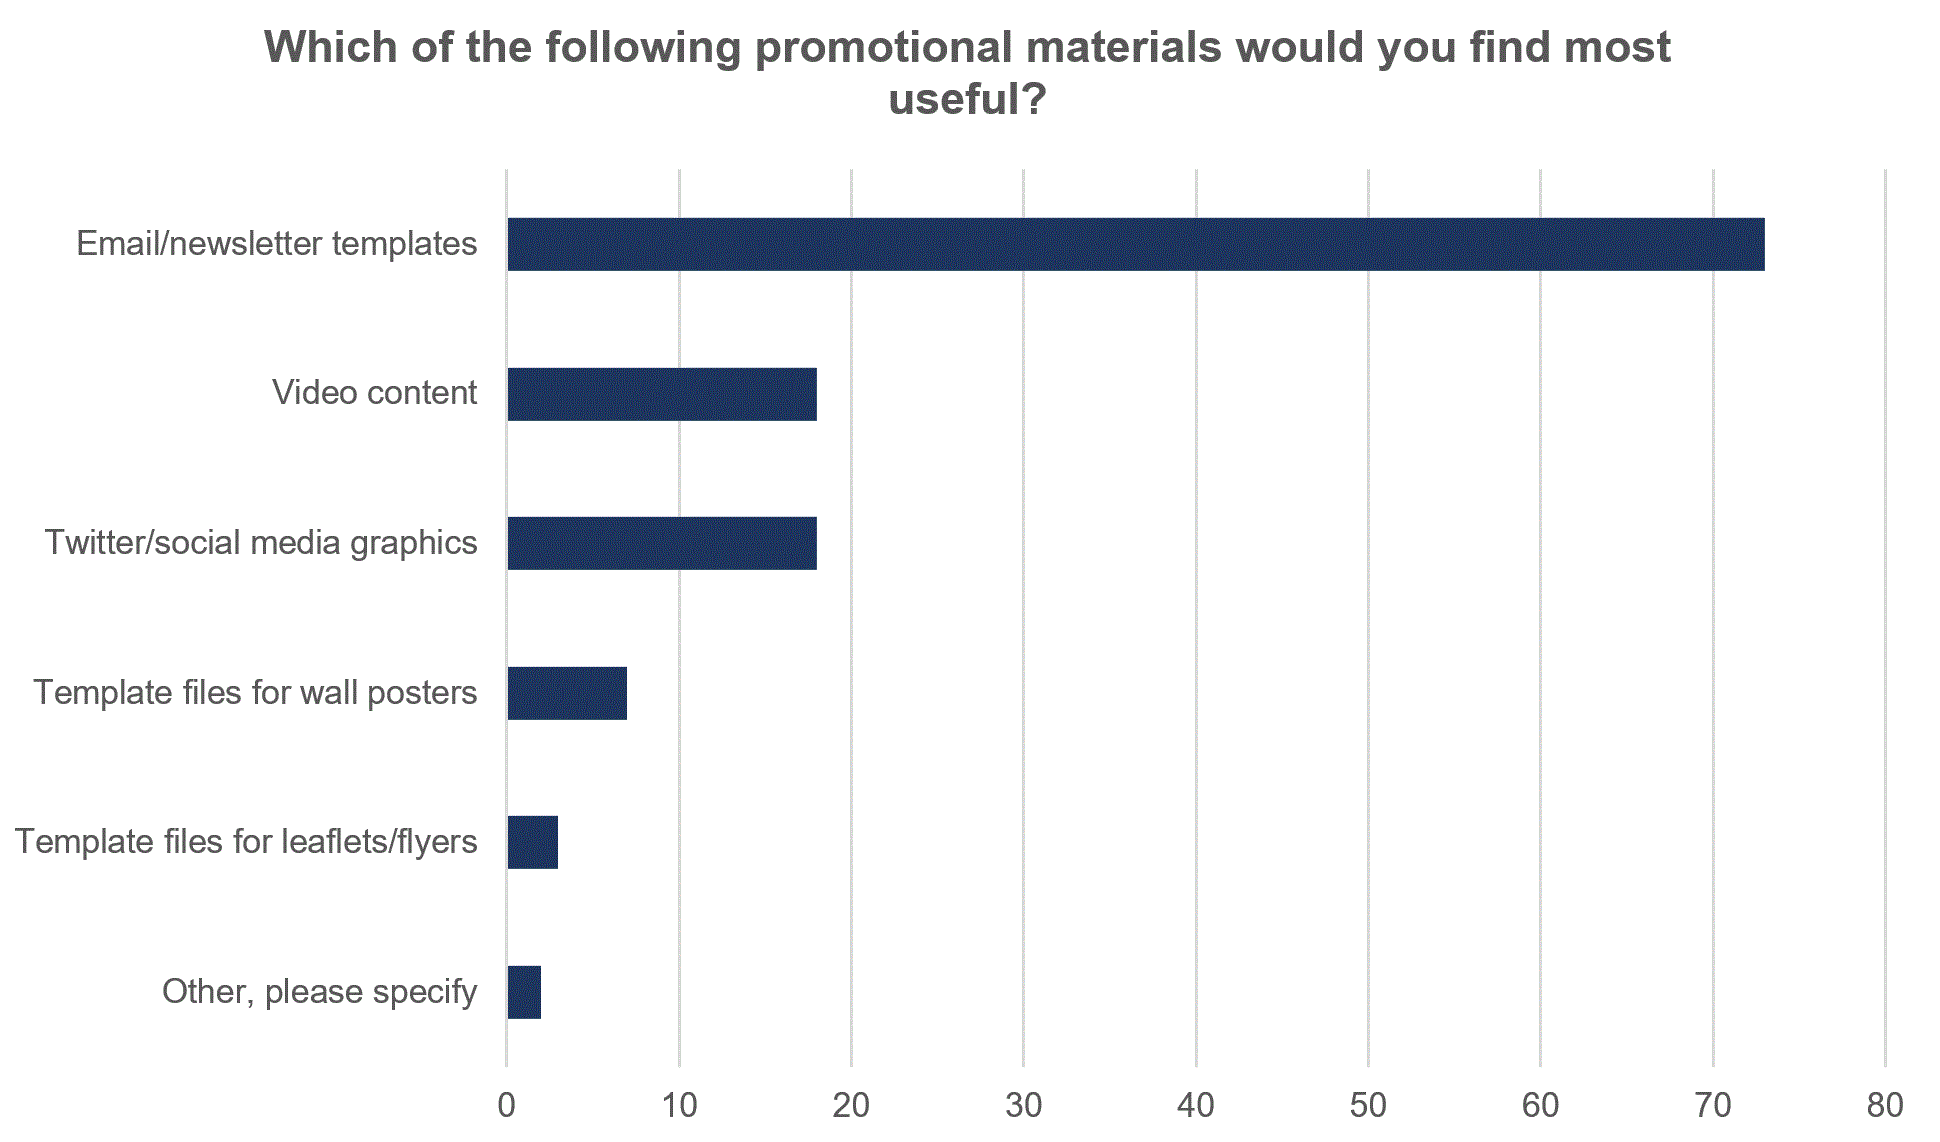 Chart 7 - Which of the following promotional materials would you find most useful?